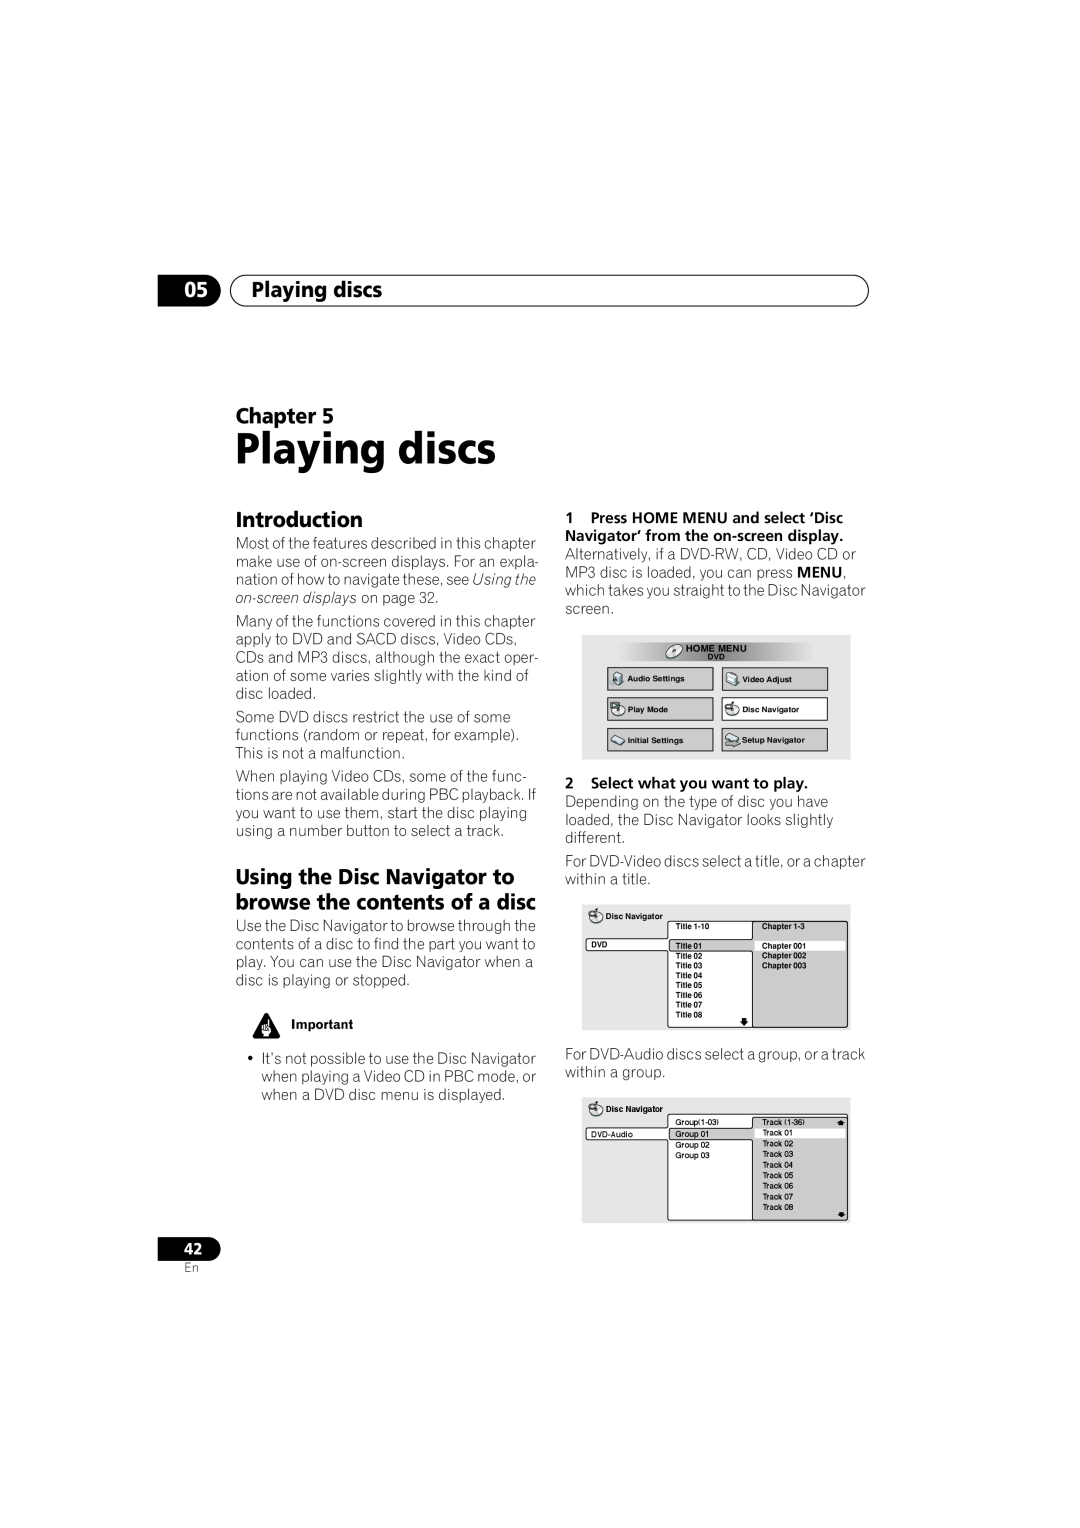 Pioneer DV-79AVi Playing discs Chapter, Introduction, Using the Disc Navigator to browse the contents of a disc 